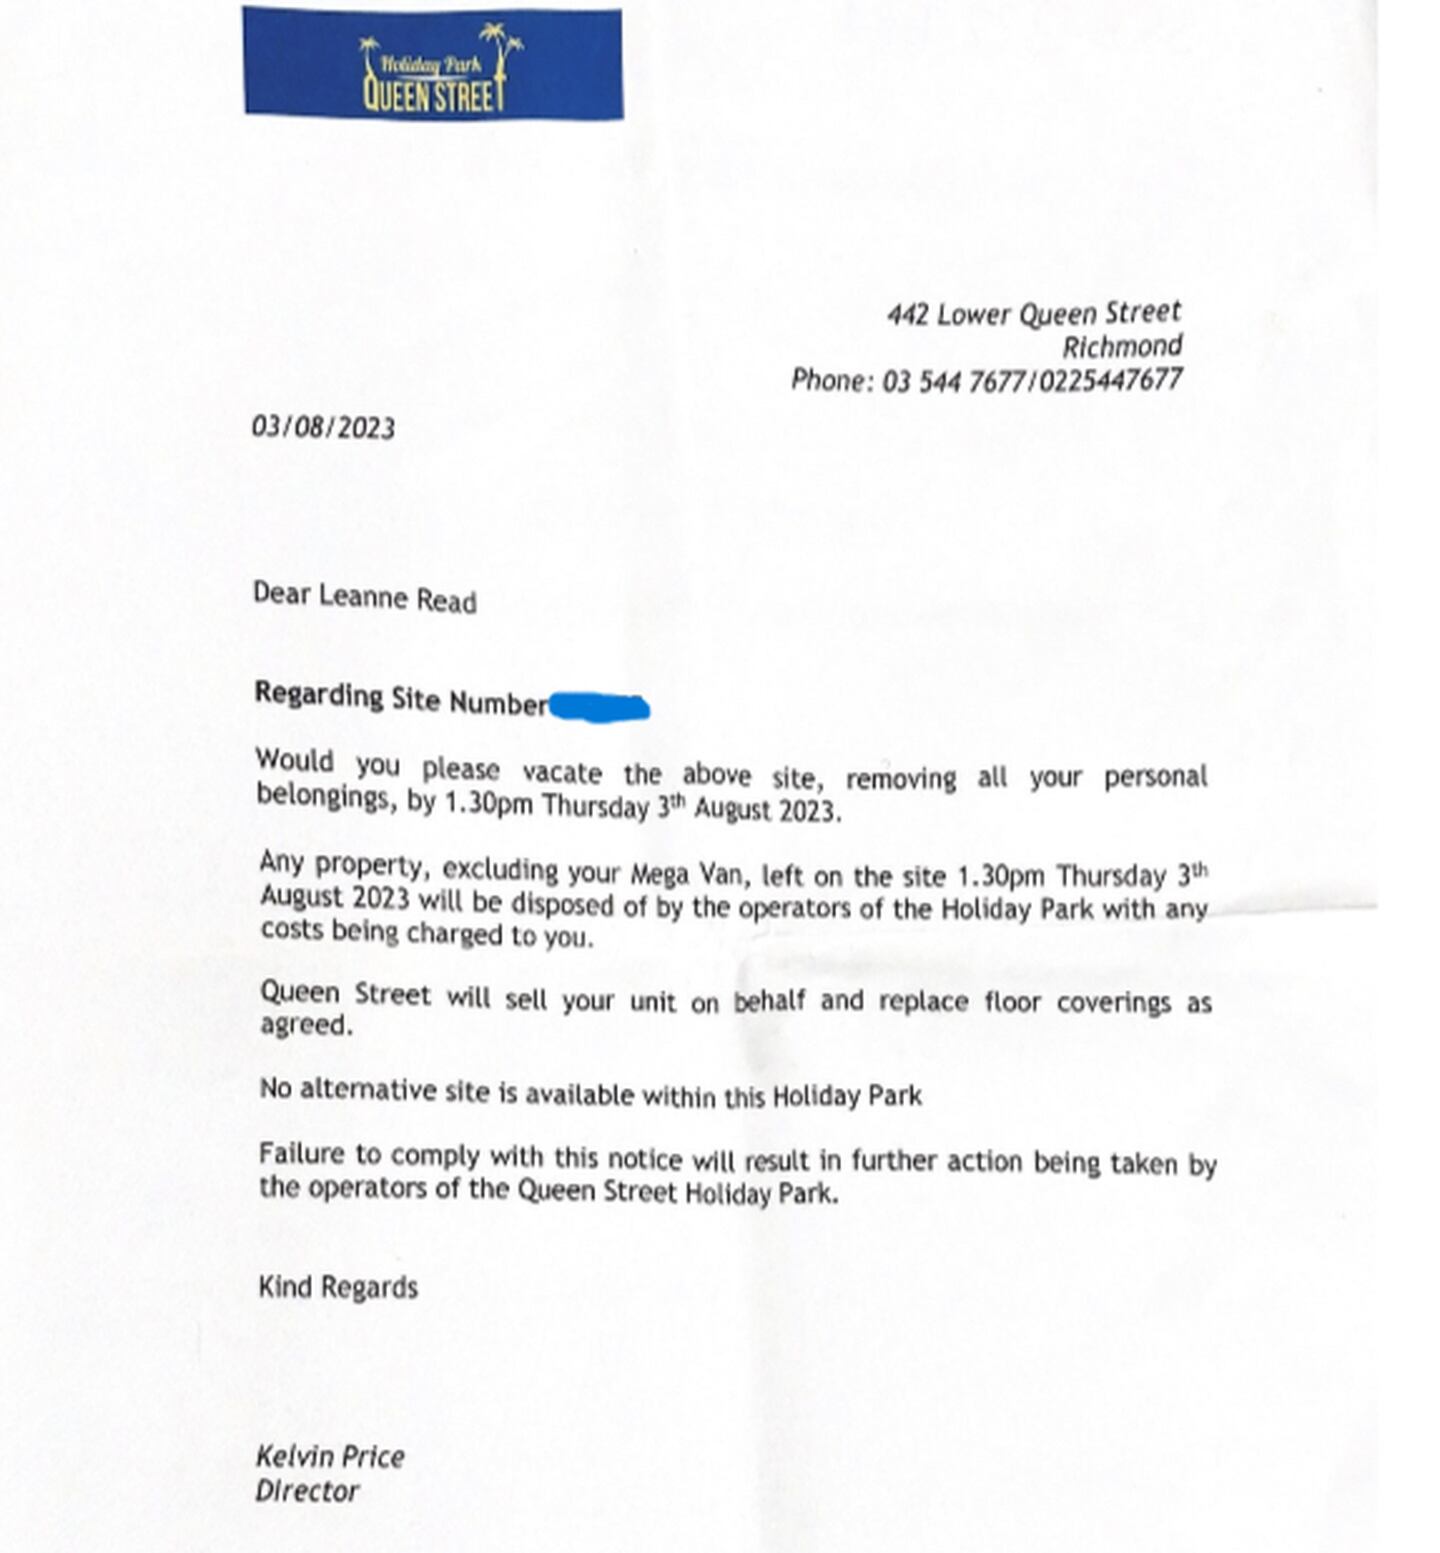 The eviction notice handed to Leanne Millar, also known as Leanne Read.